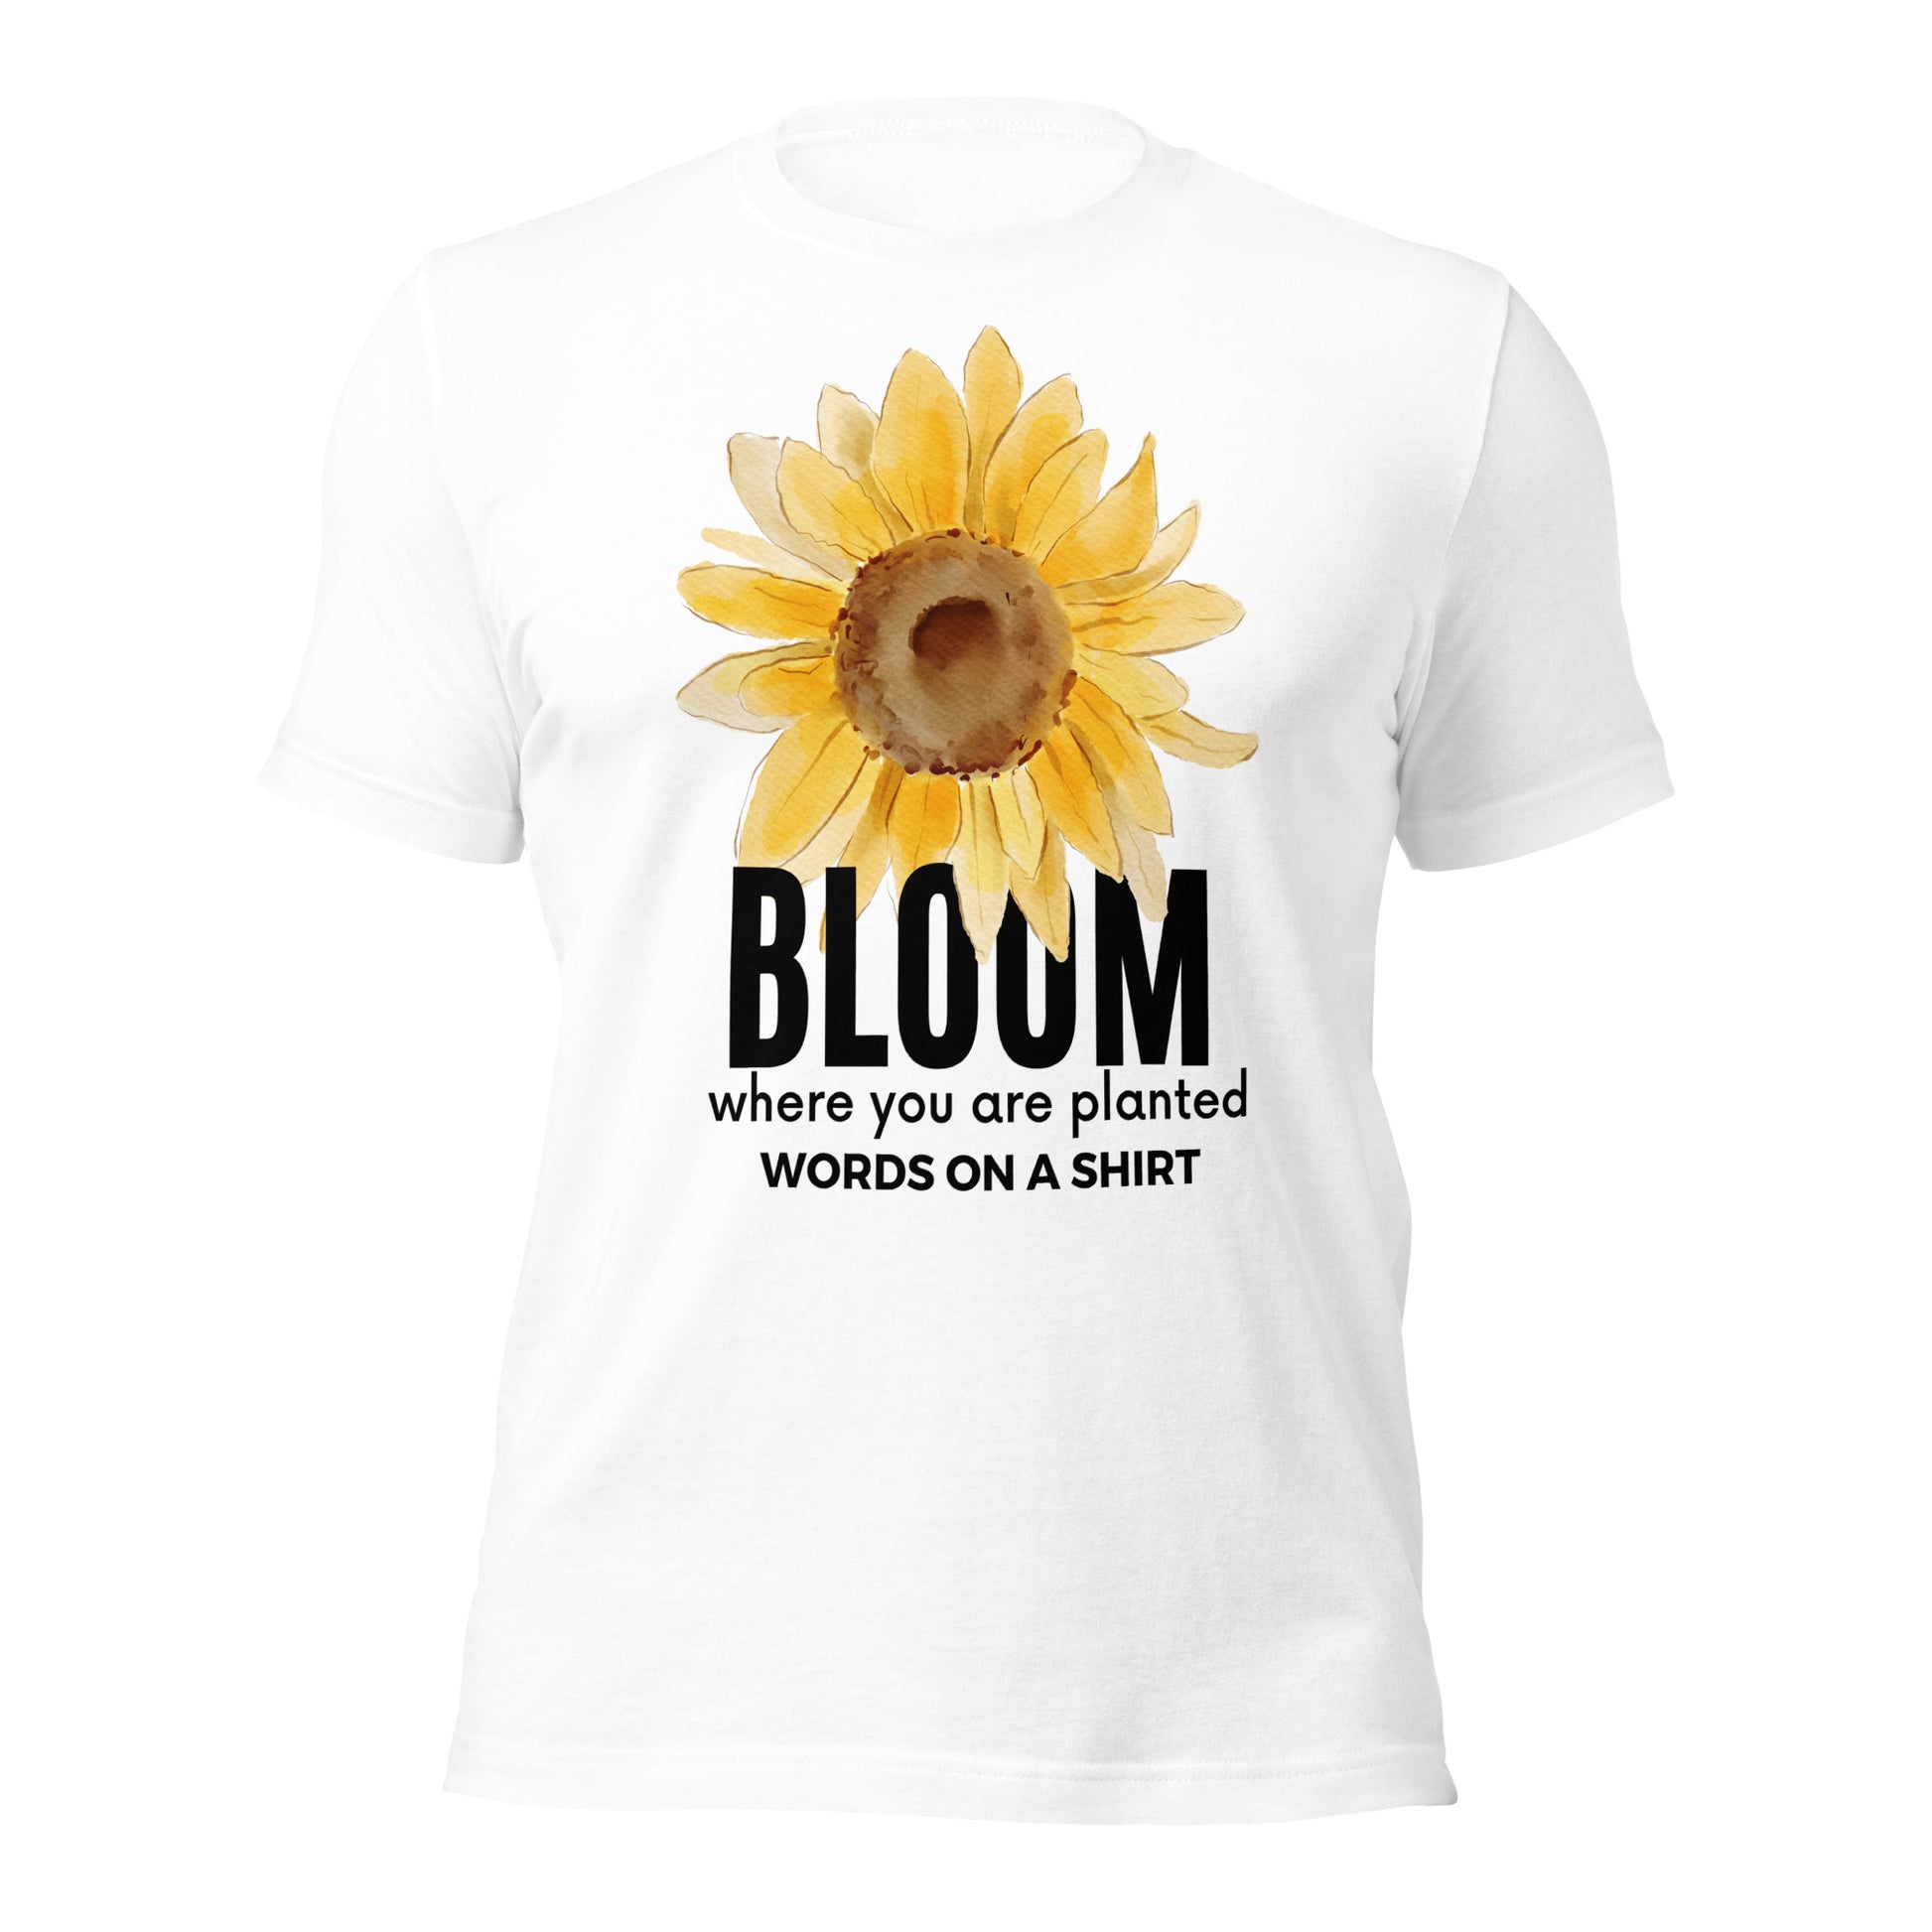 This unisex T-shirt is far superior to other products on the market, providing a unique combination of comfort, breathability, and flexibility with every wear. A special design sets it apart from the ordinary; plus, with its inspirational slogan, it's sure to bring out the best in any situation.